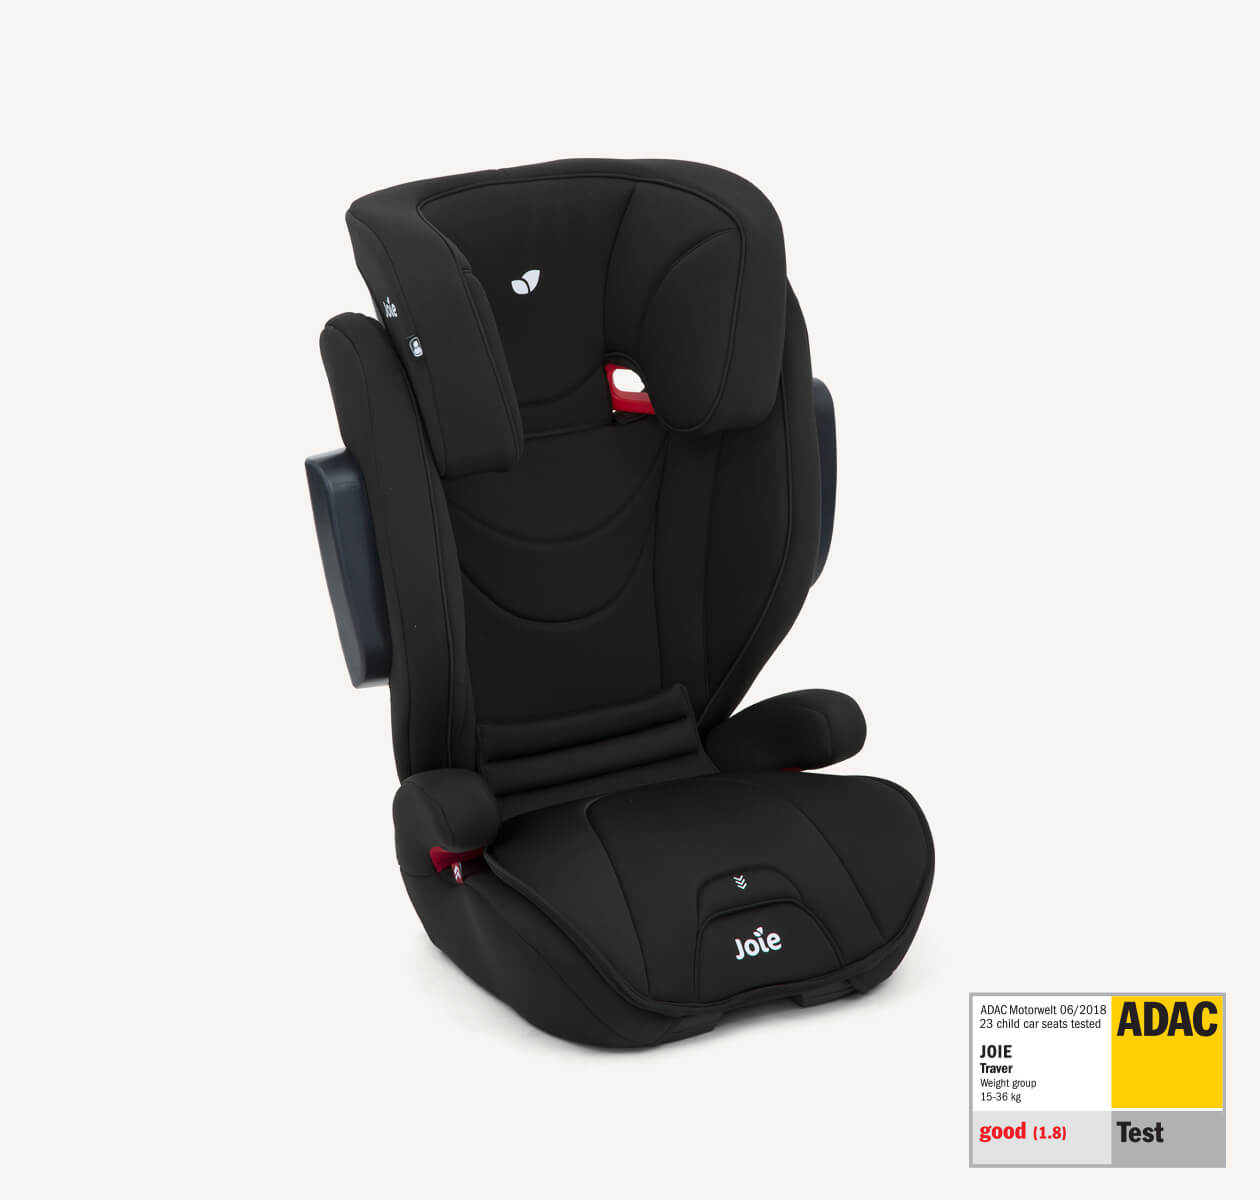 https://dd.joiebaby.com/media/catalog/product/p/1/p1-joie-belted-booster-carseat-traver-coal-right-angle-adac.jpg?type=product&height=290&width=305